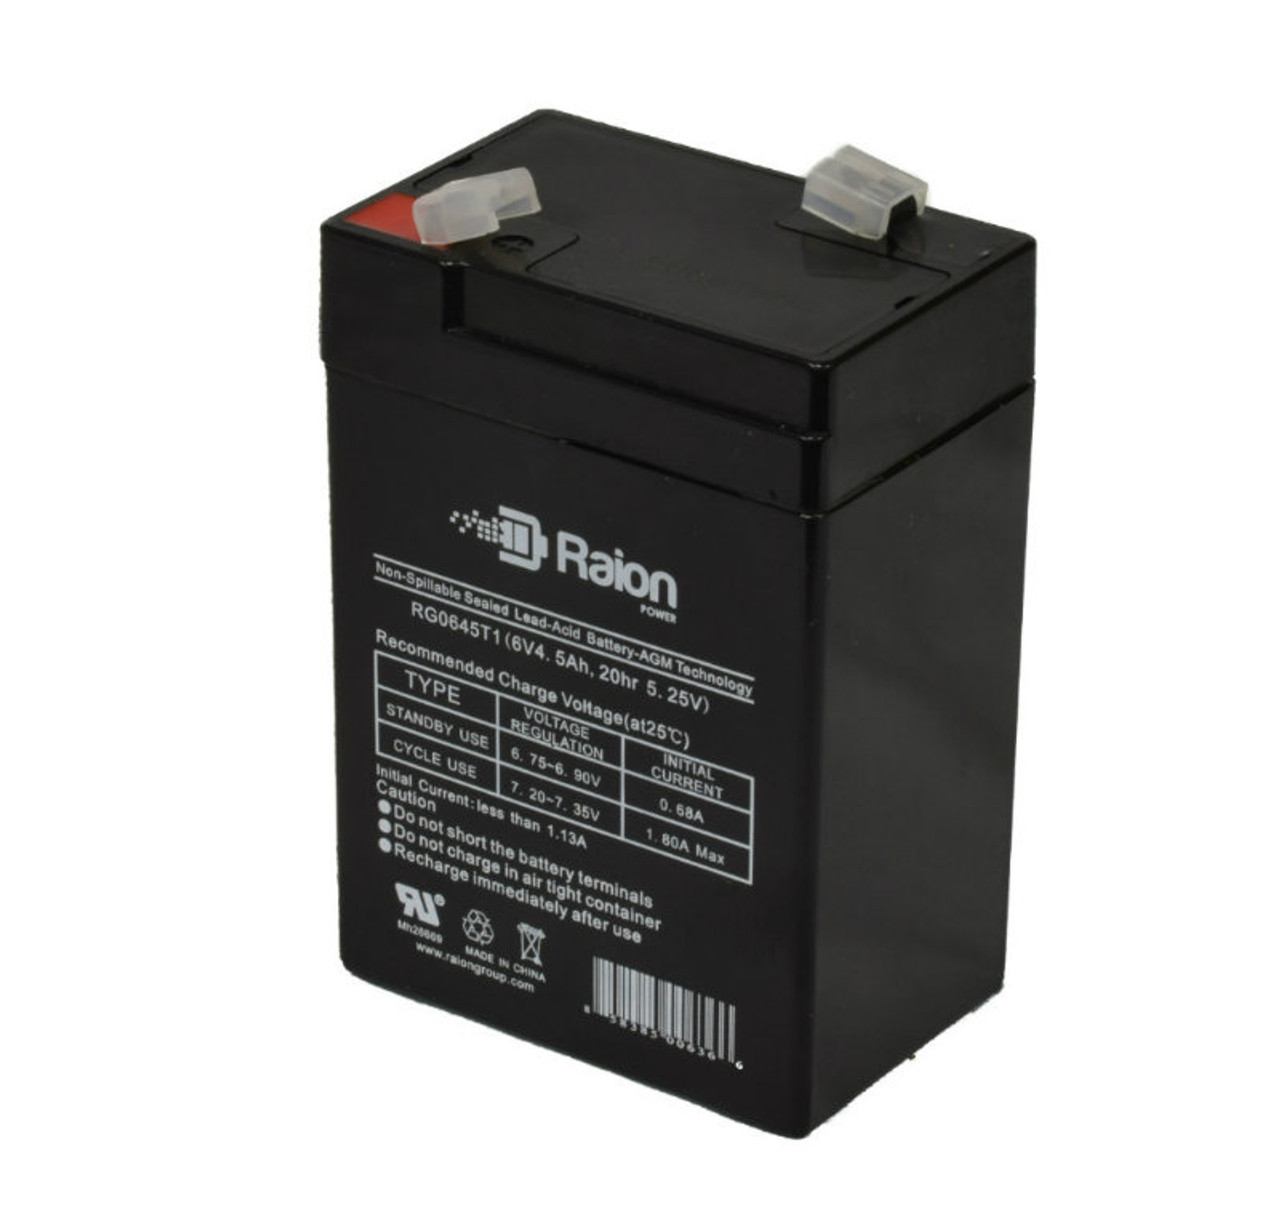 Raion Power RG0645T1 6V 4.5Ah Replacement Battery Cartridge for Alaris Medical 2001 Intell Pump